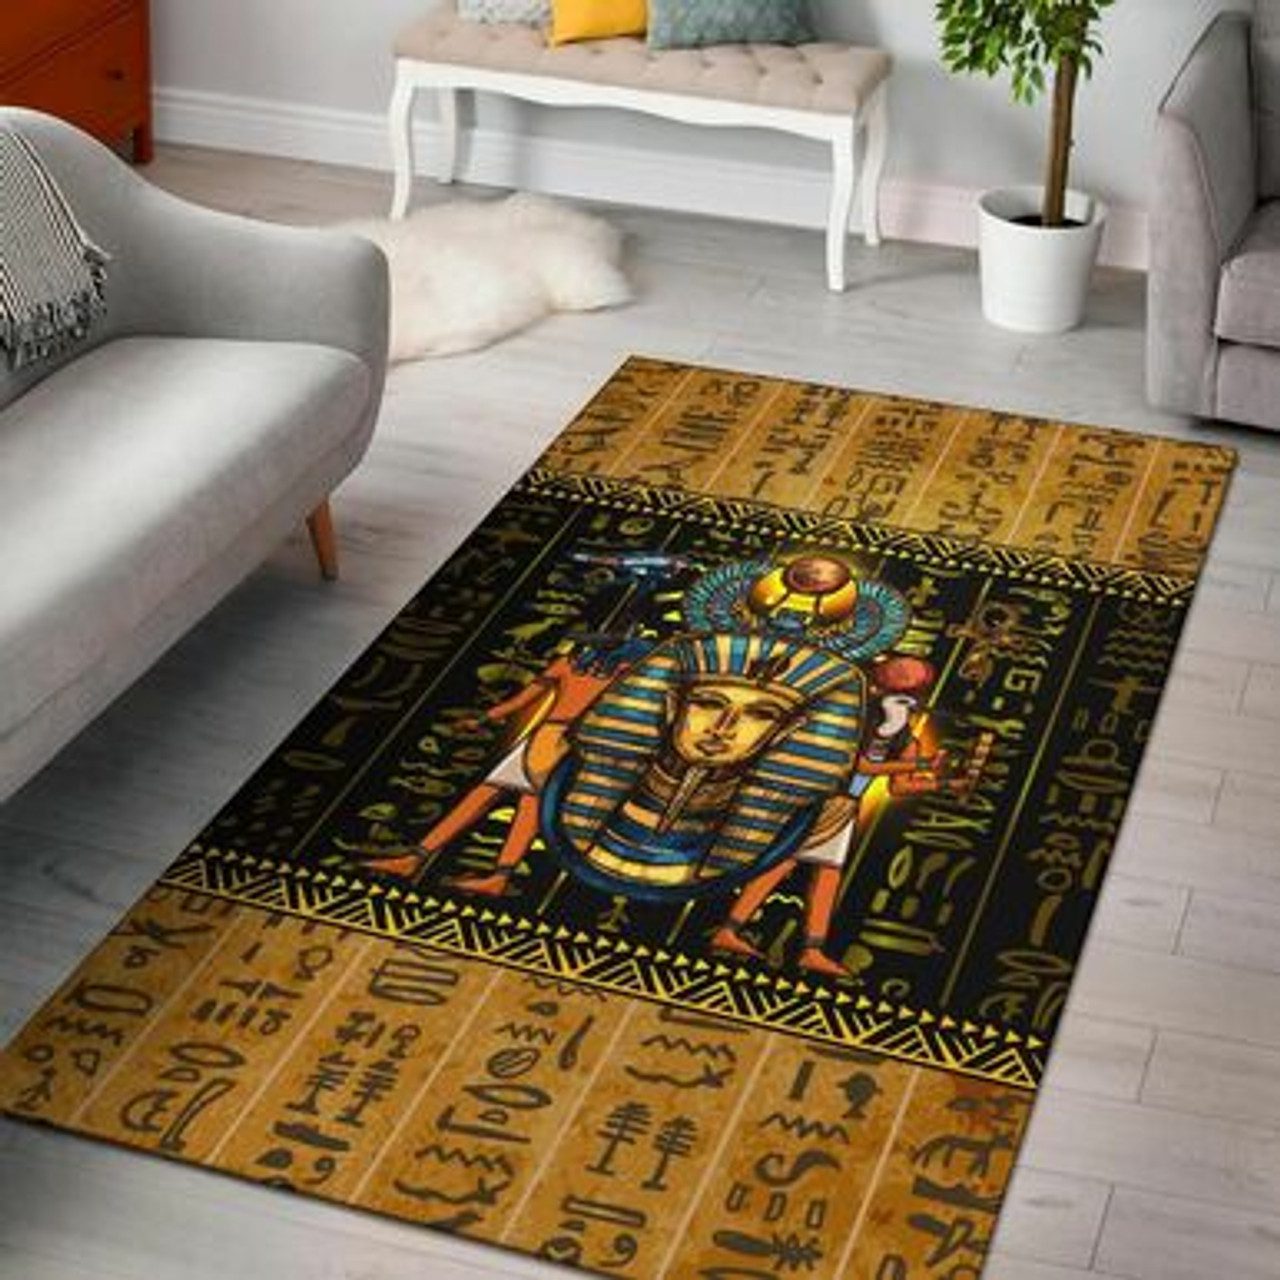 Egyptian Area Rug – African Patterns Mysteries Of Ancient Egypt Area Rug